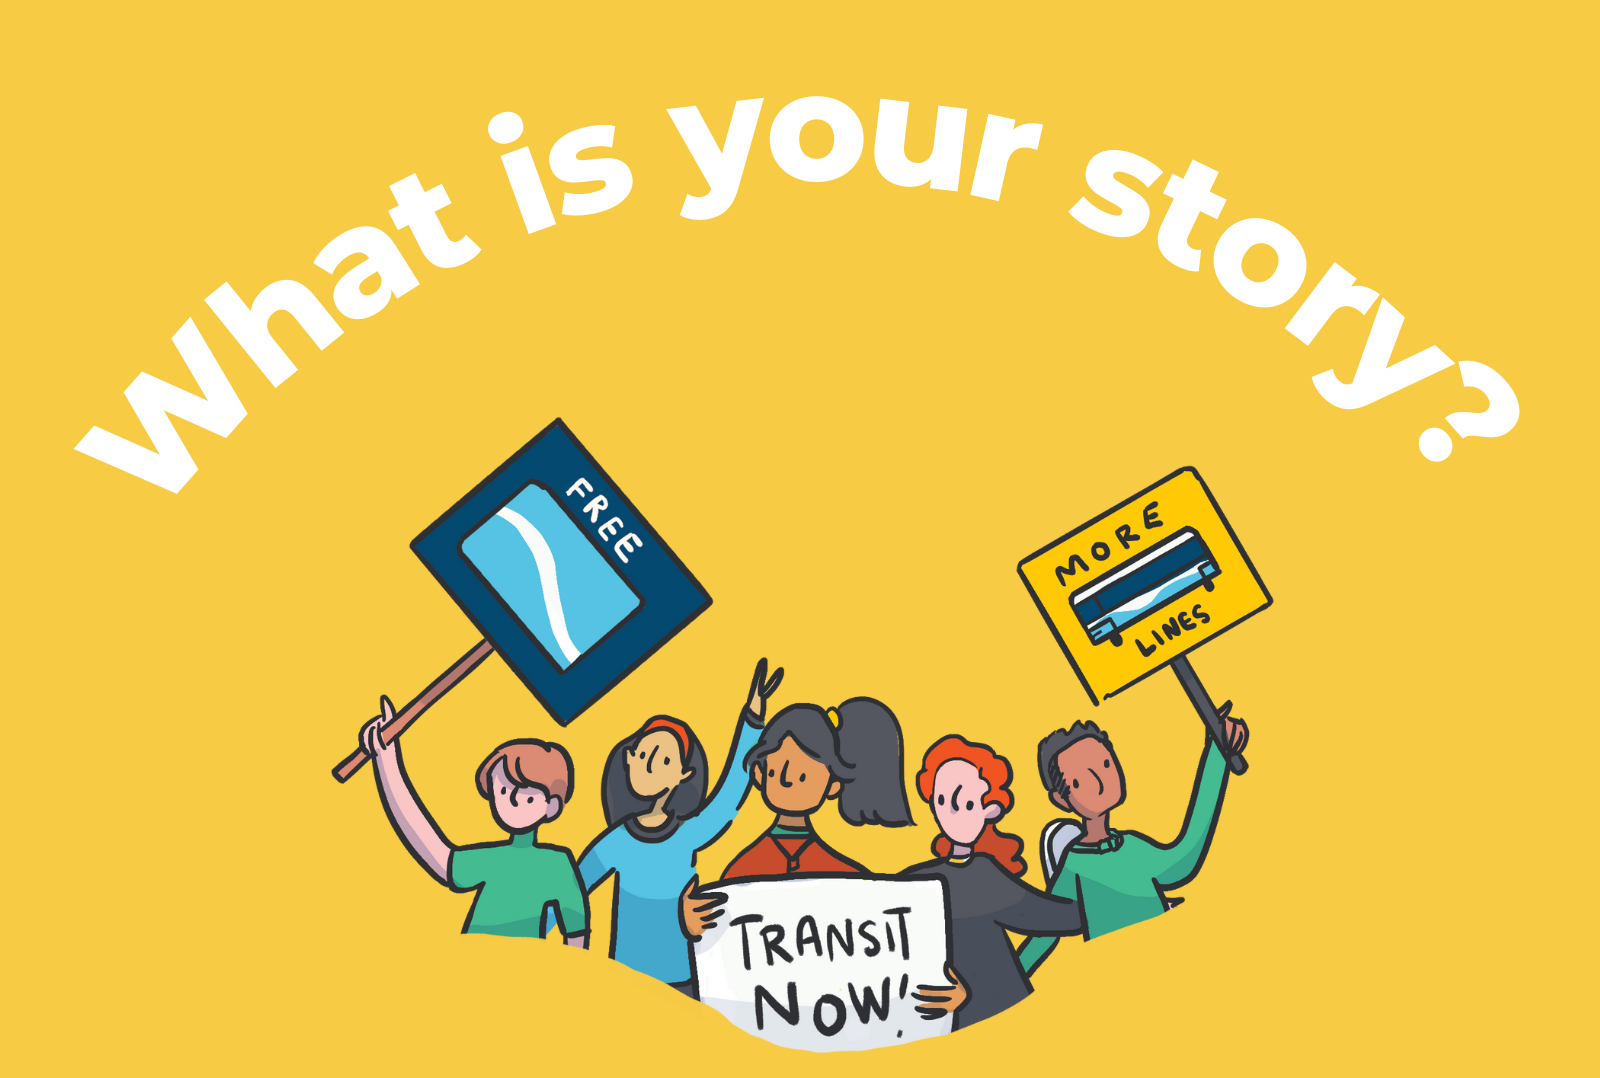 What is your story? Illustration of people protesting for more transit on yellow background